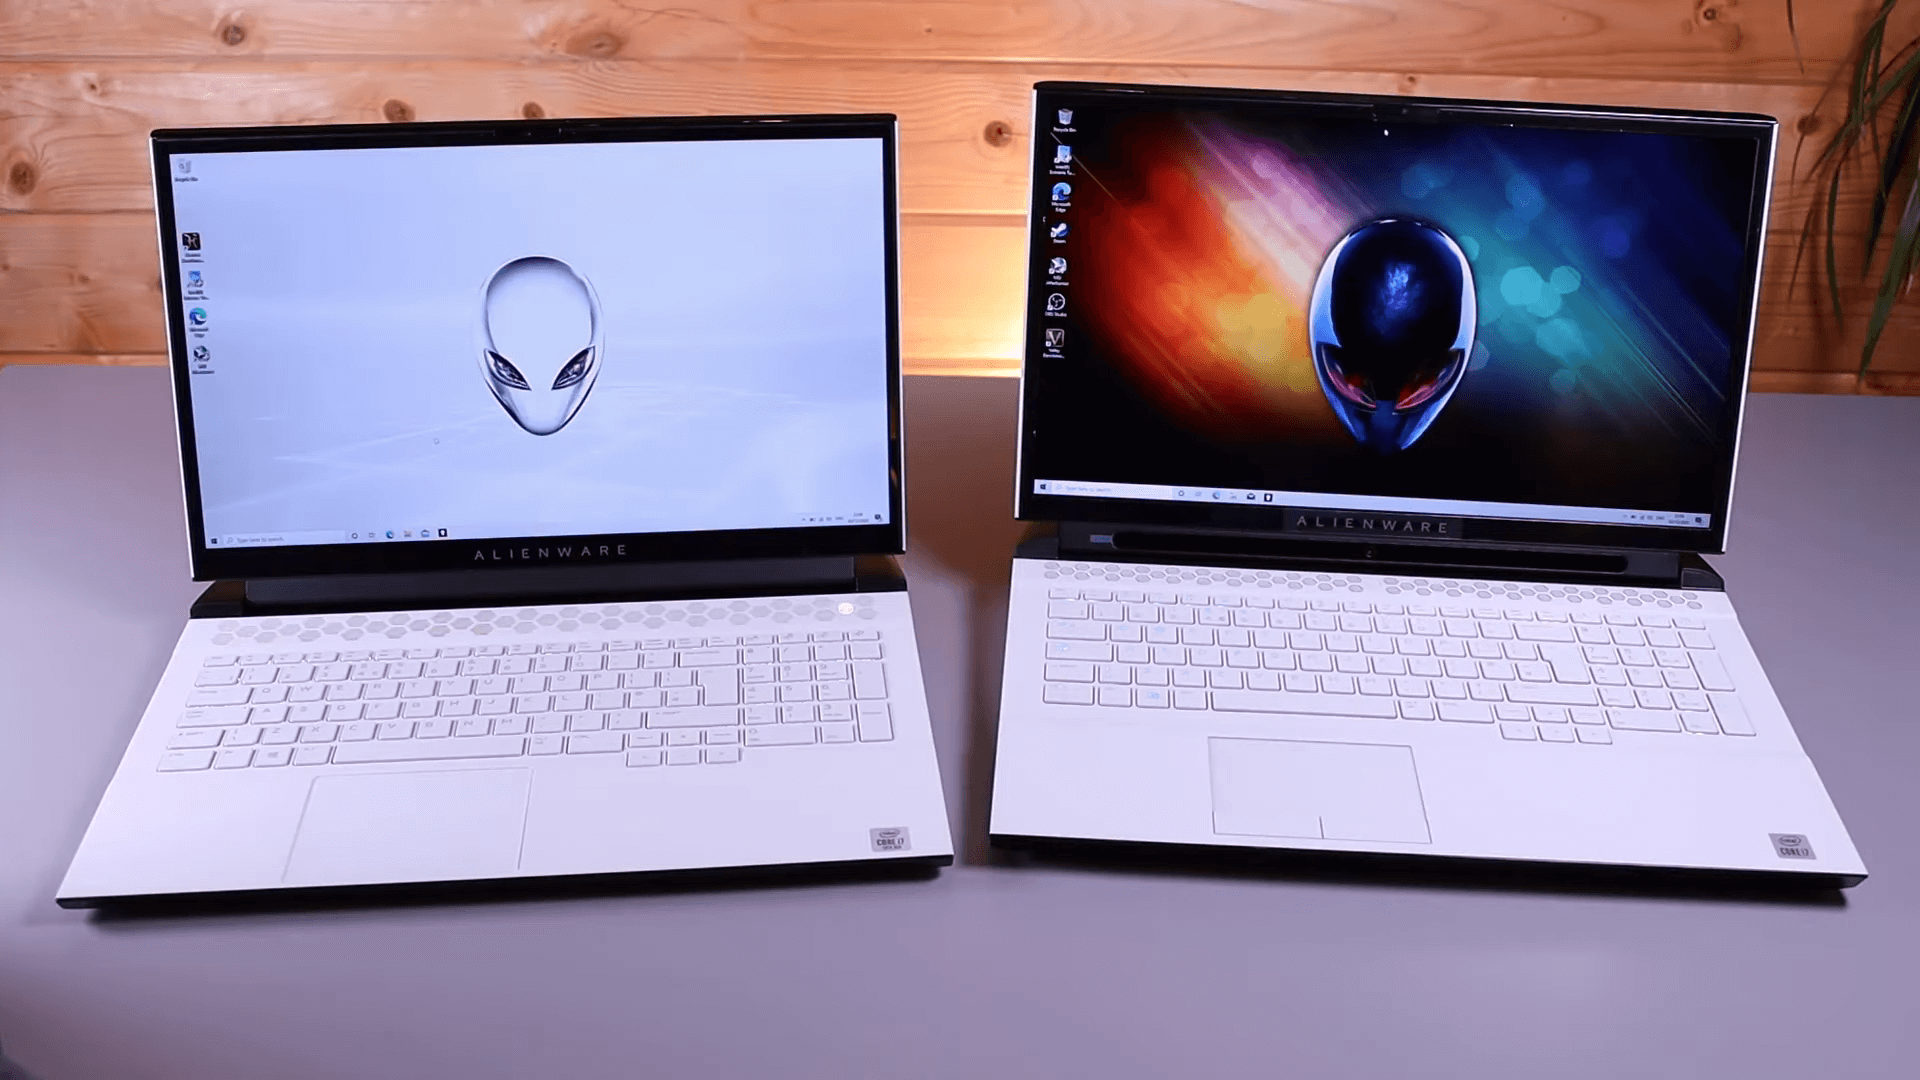 Dell Alienware Area 51M R2 vs M17 R3: Which One is Better in Gaming?